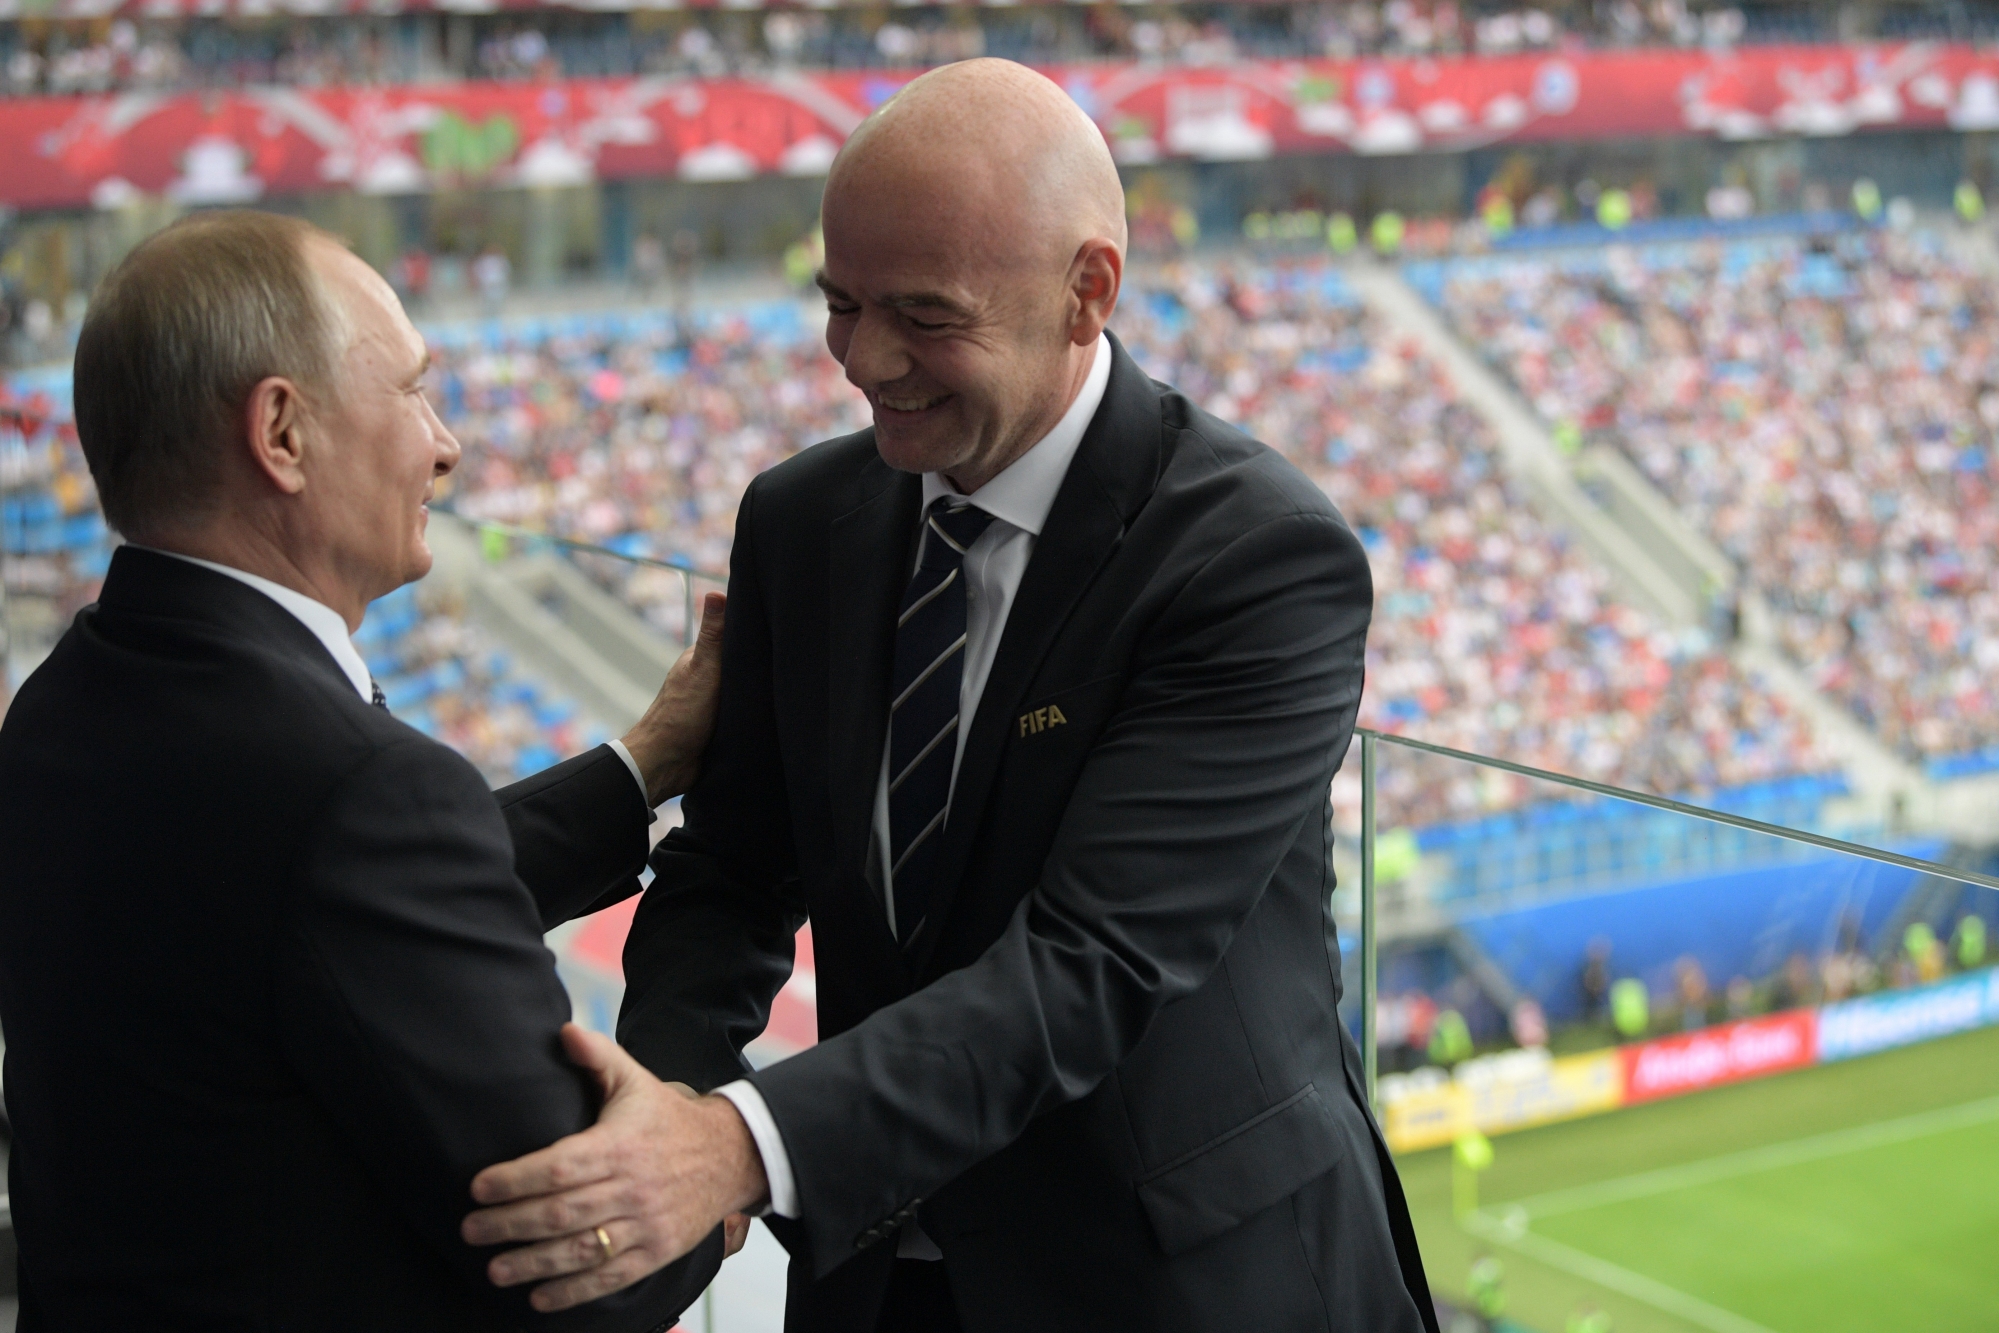 epa06033878 Russian President Vladimir Putin (L) and FIFA president Gianni Infantino before the FIFA Confederations Cup 2017 group A soccer match between Russia and New Zealand at the Saint Petersburg stadium in St.Petersburg, Russia, 17 June 2017.  EPA/ALEXEI DRUZHININ / SPUTNIK / GOVERNMENT PRESS SERVICE POOL RUSSIA SOCCER FIFA CONFEDERATIONS CUP 2017